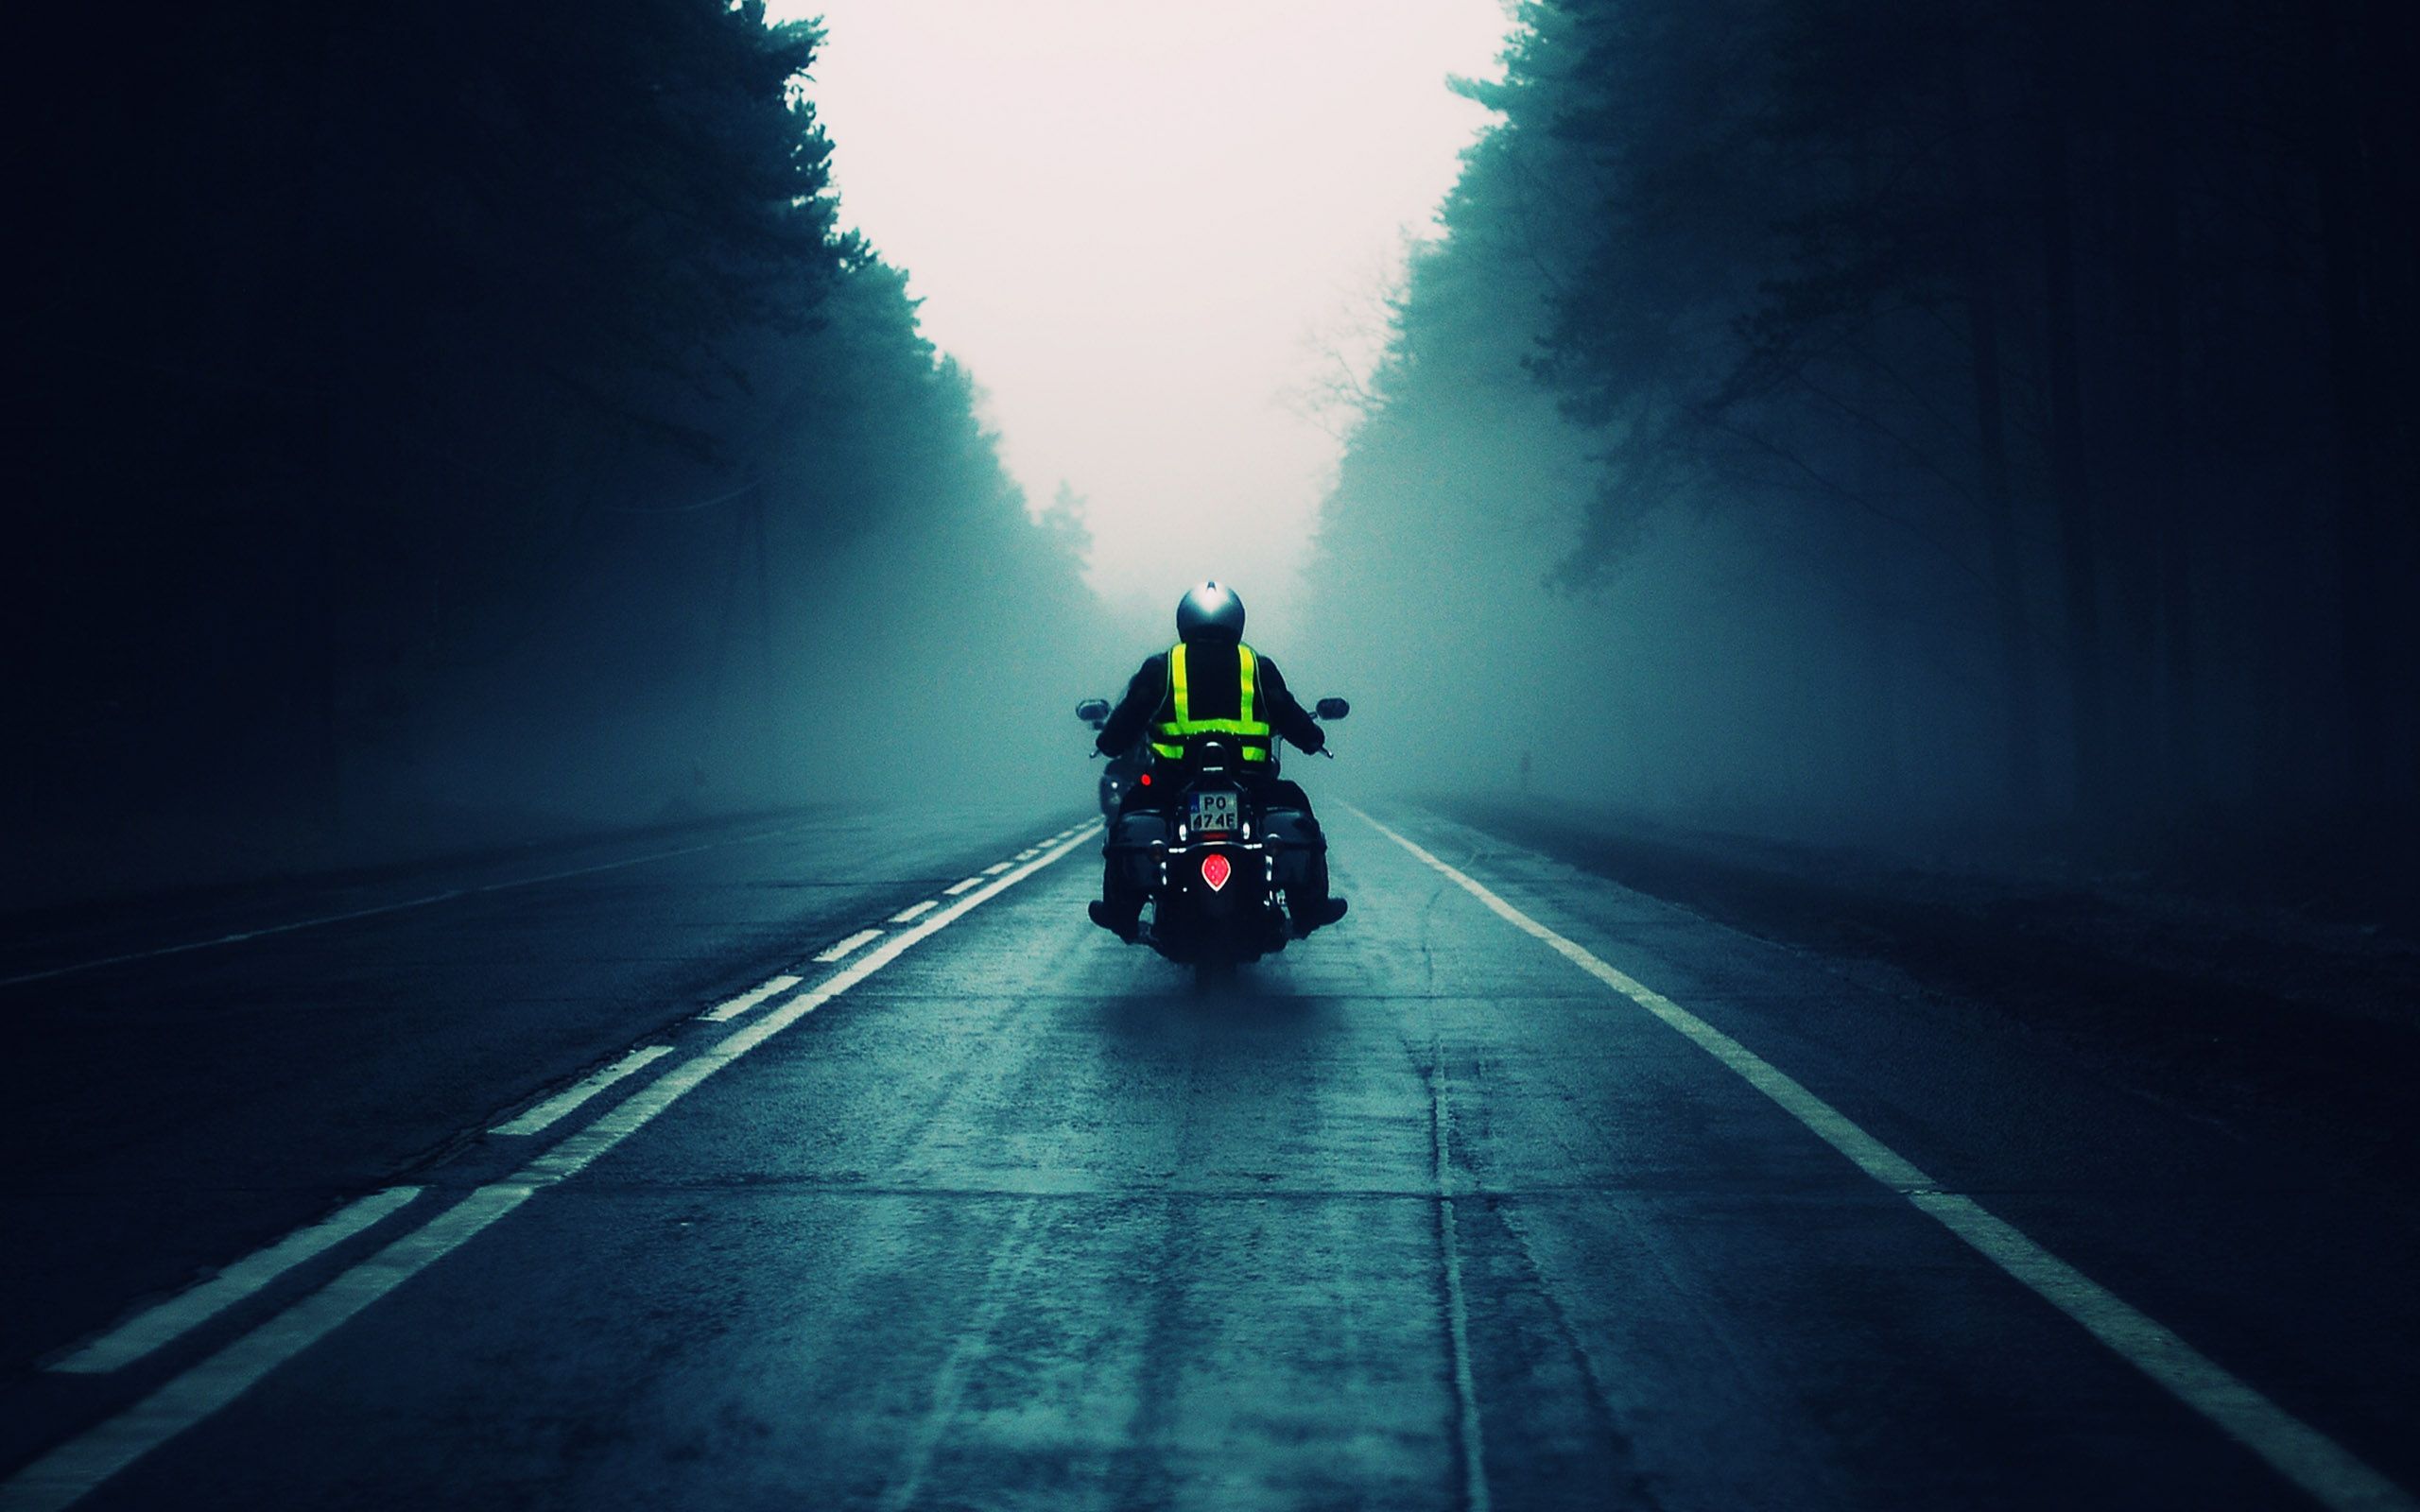 Motorcycles HD Wallpapers